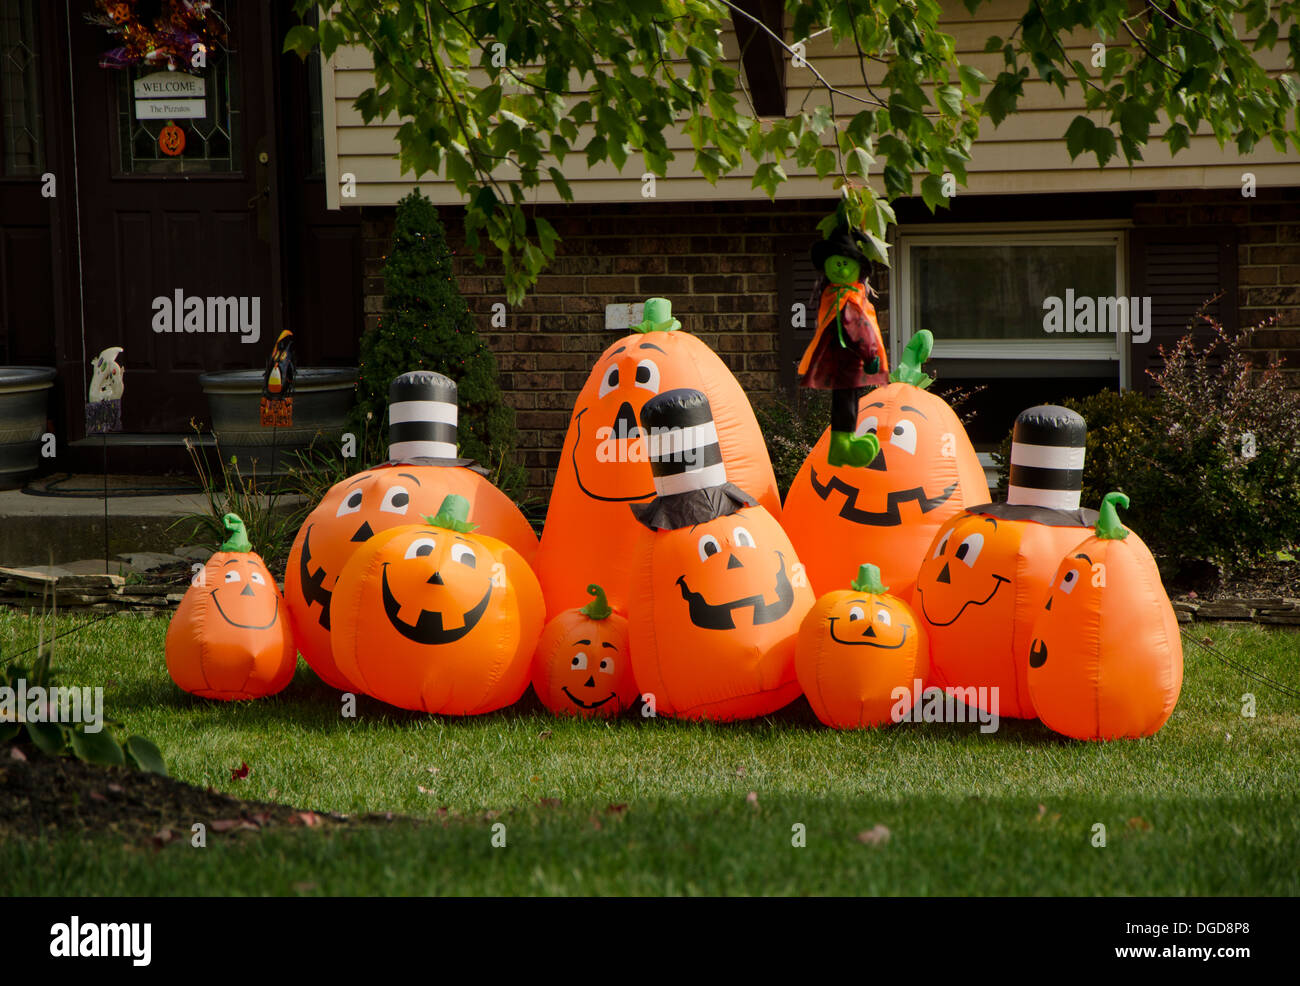 Inflatable pumpkins decorating the front garden during halloween. Easton Pa. USA Stock Photo